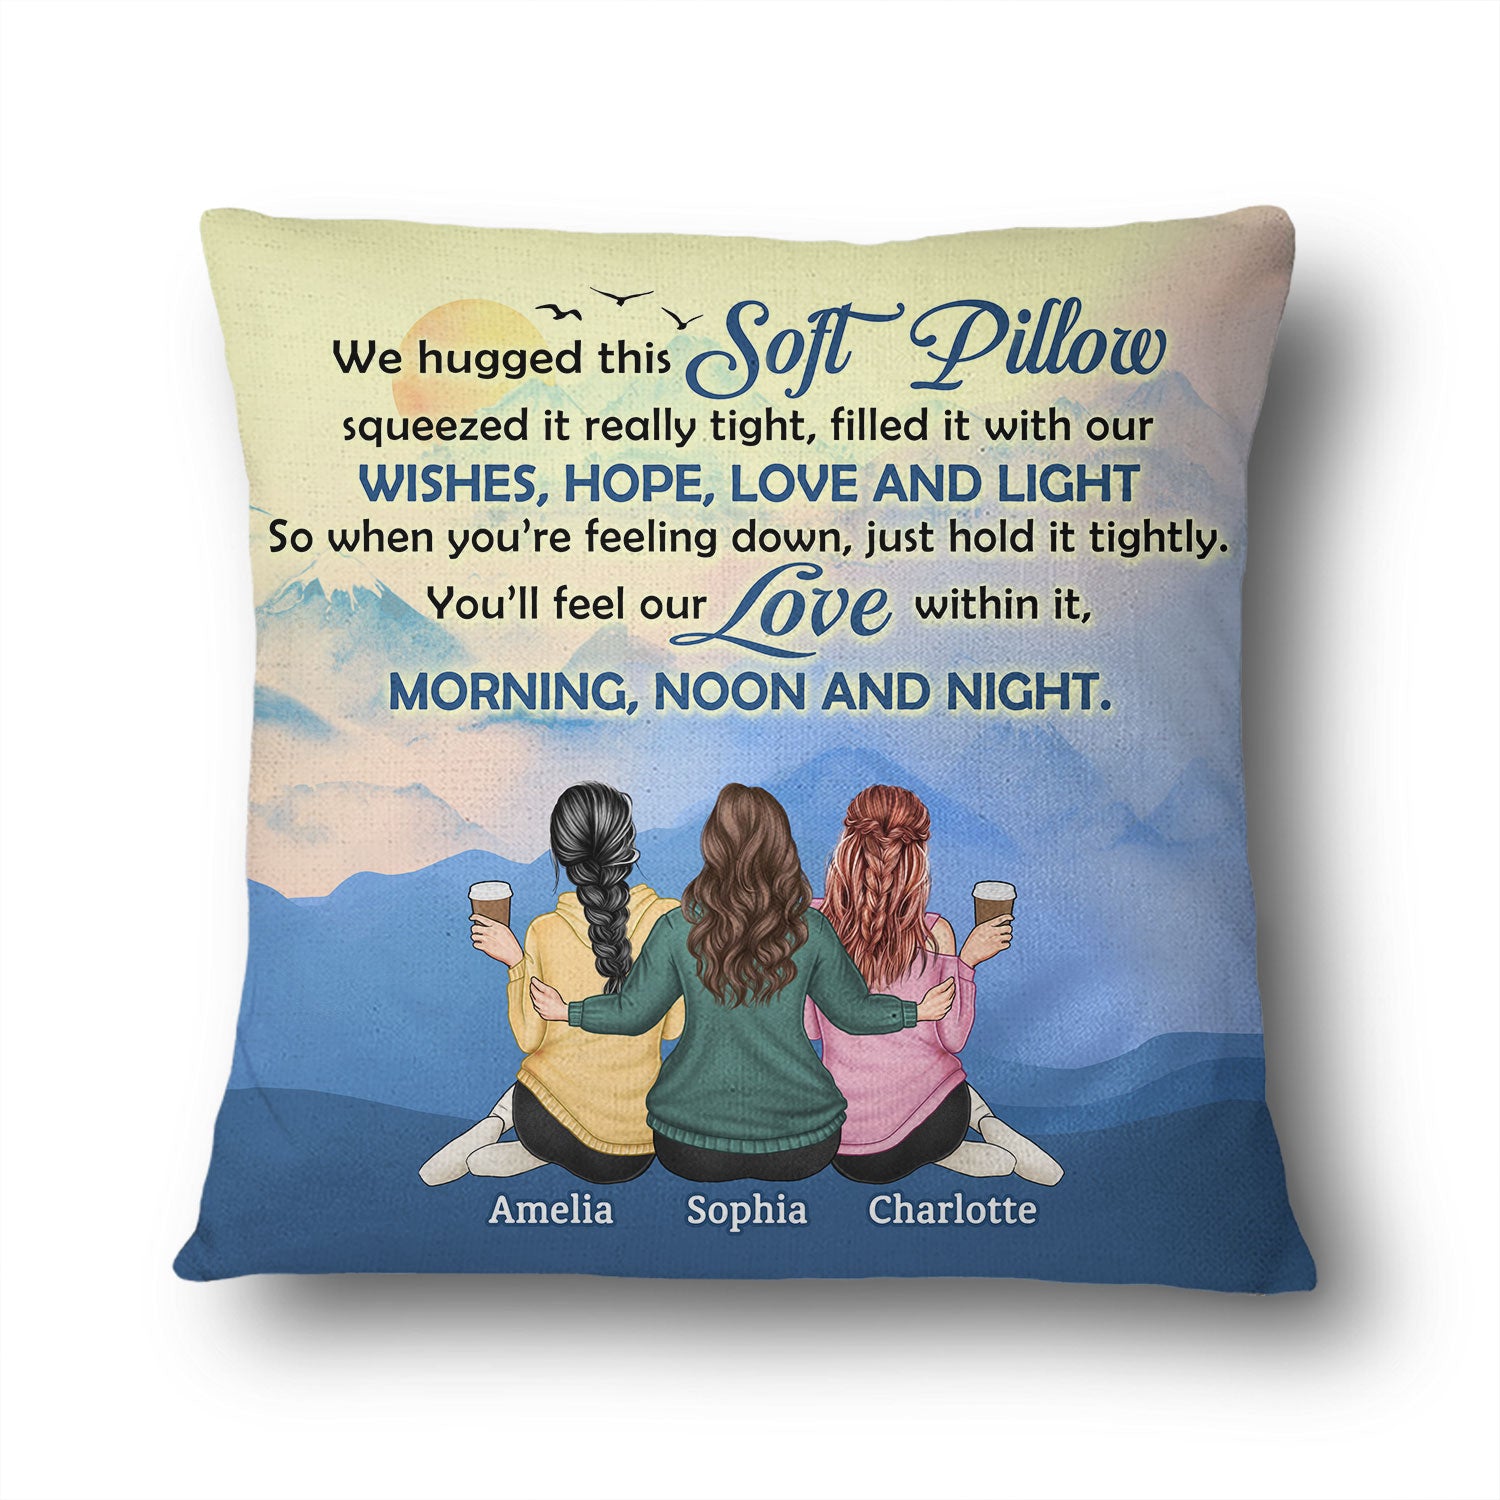 I Hugged This Soft Pillow Squeezed It Really Tight - Birthday, Loving Gift For Sister, Brother, Siblings, Besties, Friends, Family - Personalized Custom Pillow